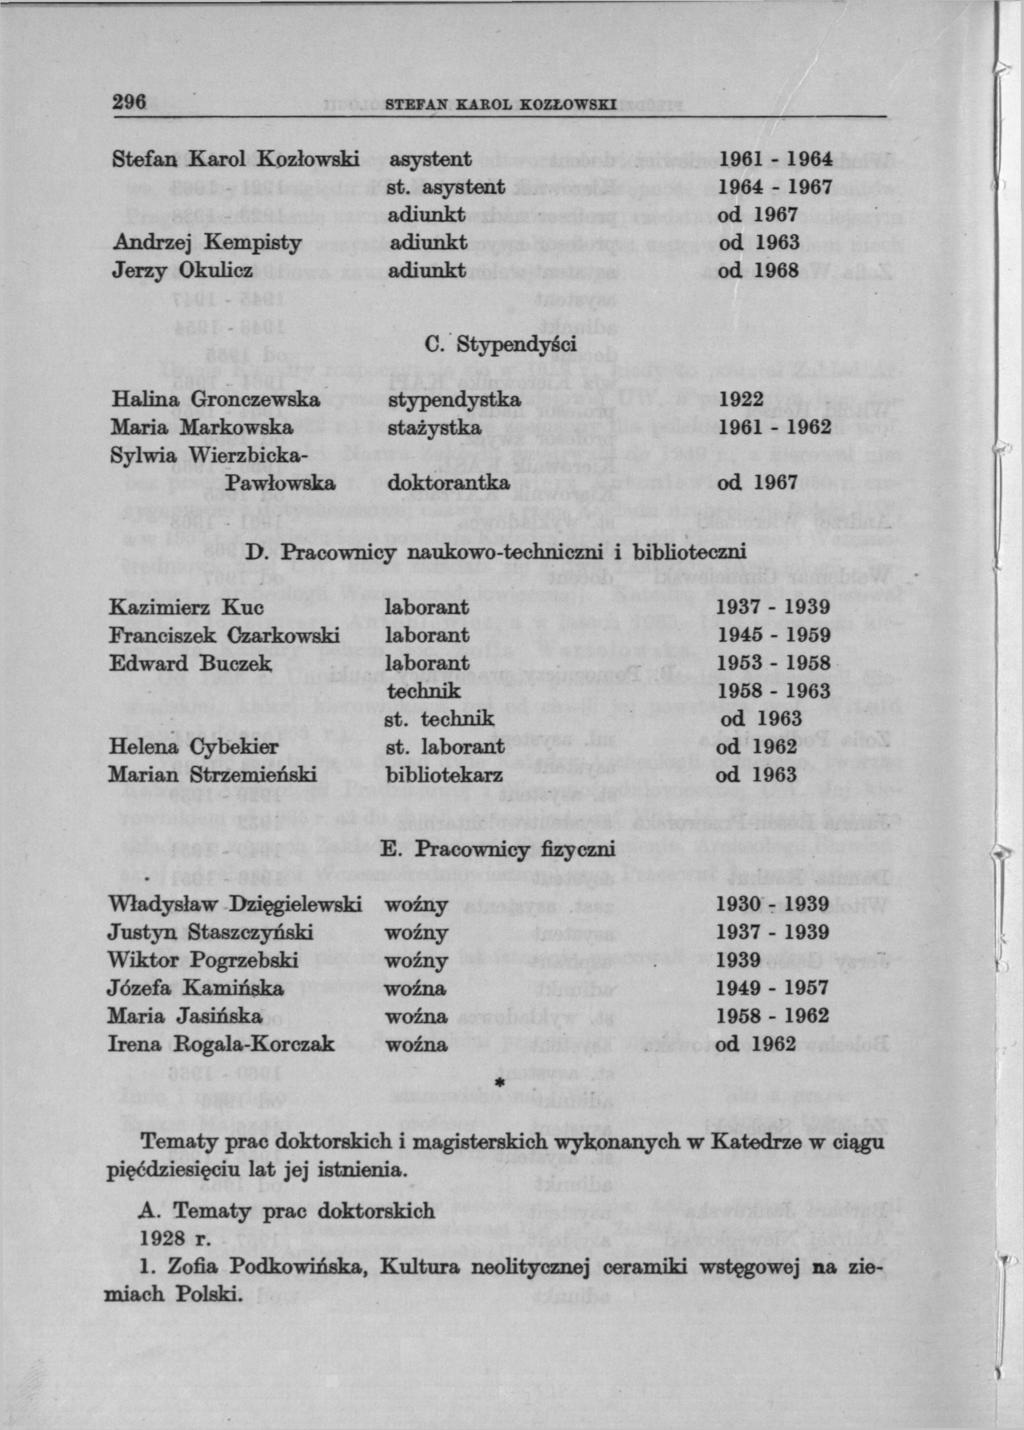 296 STEFAN KAROL KOZŁOWSKI Stefan Karol Kozłowski asystent 1961-1964 st. asystent 1964-1967 adiunkt od 1967 Andrzej Kempisty adiunkt od 1963 Jerzy Okulicz adiunkt od 1968 C.